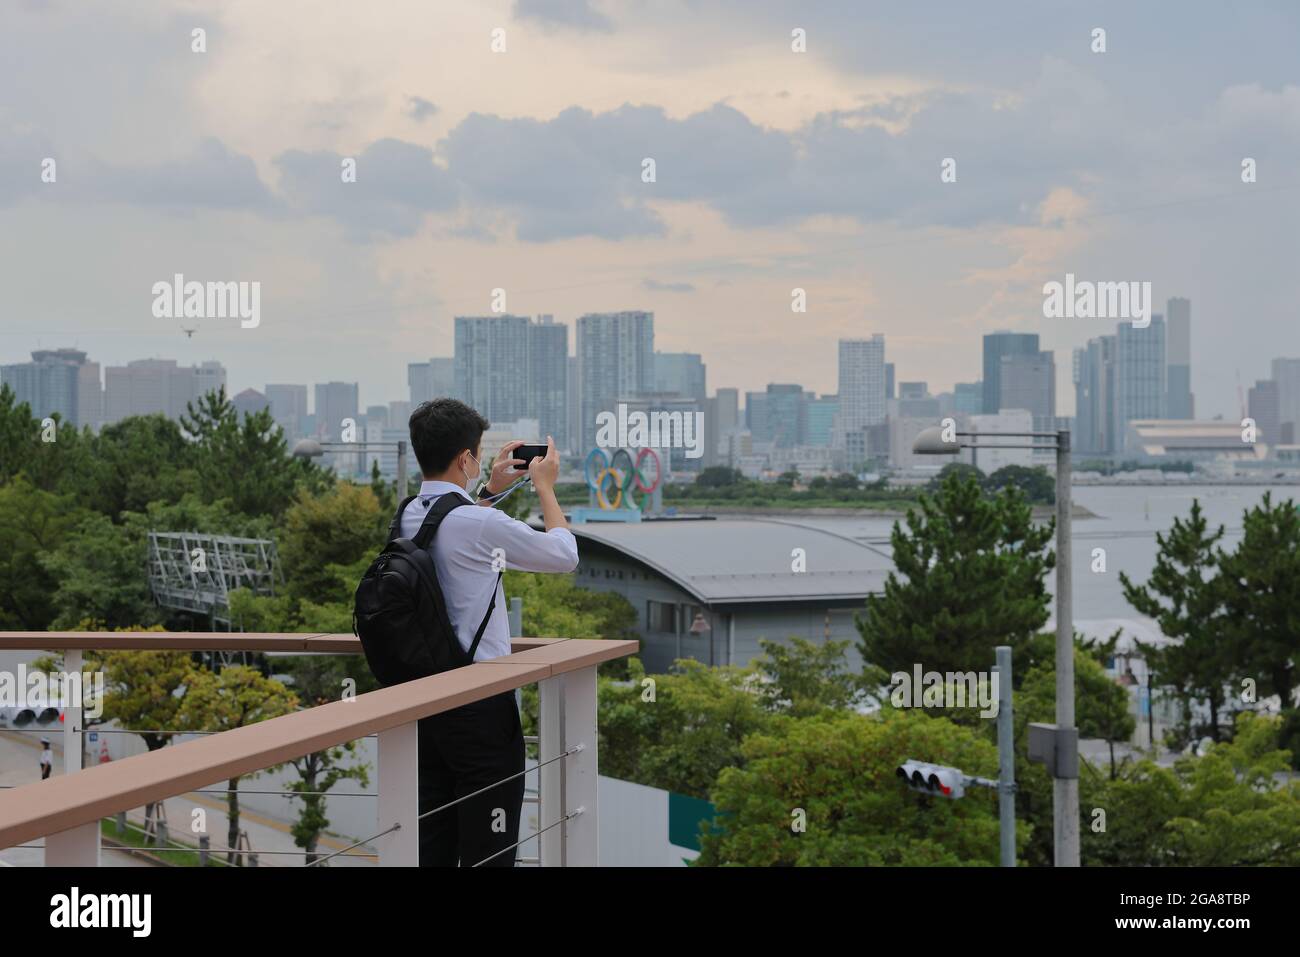 A man takes pictures of Odaiba Marine Park, a Tokyo 2020 Olympics sporting Venue for Triathlon and Marathon Swimming on day 7 of the Tokyo 2020 Olympic games. Stock Photo